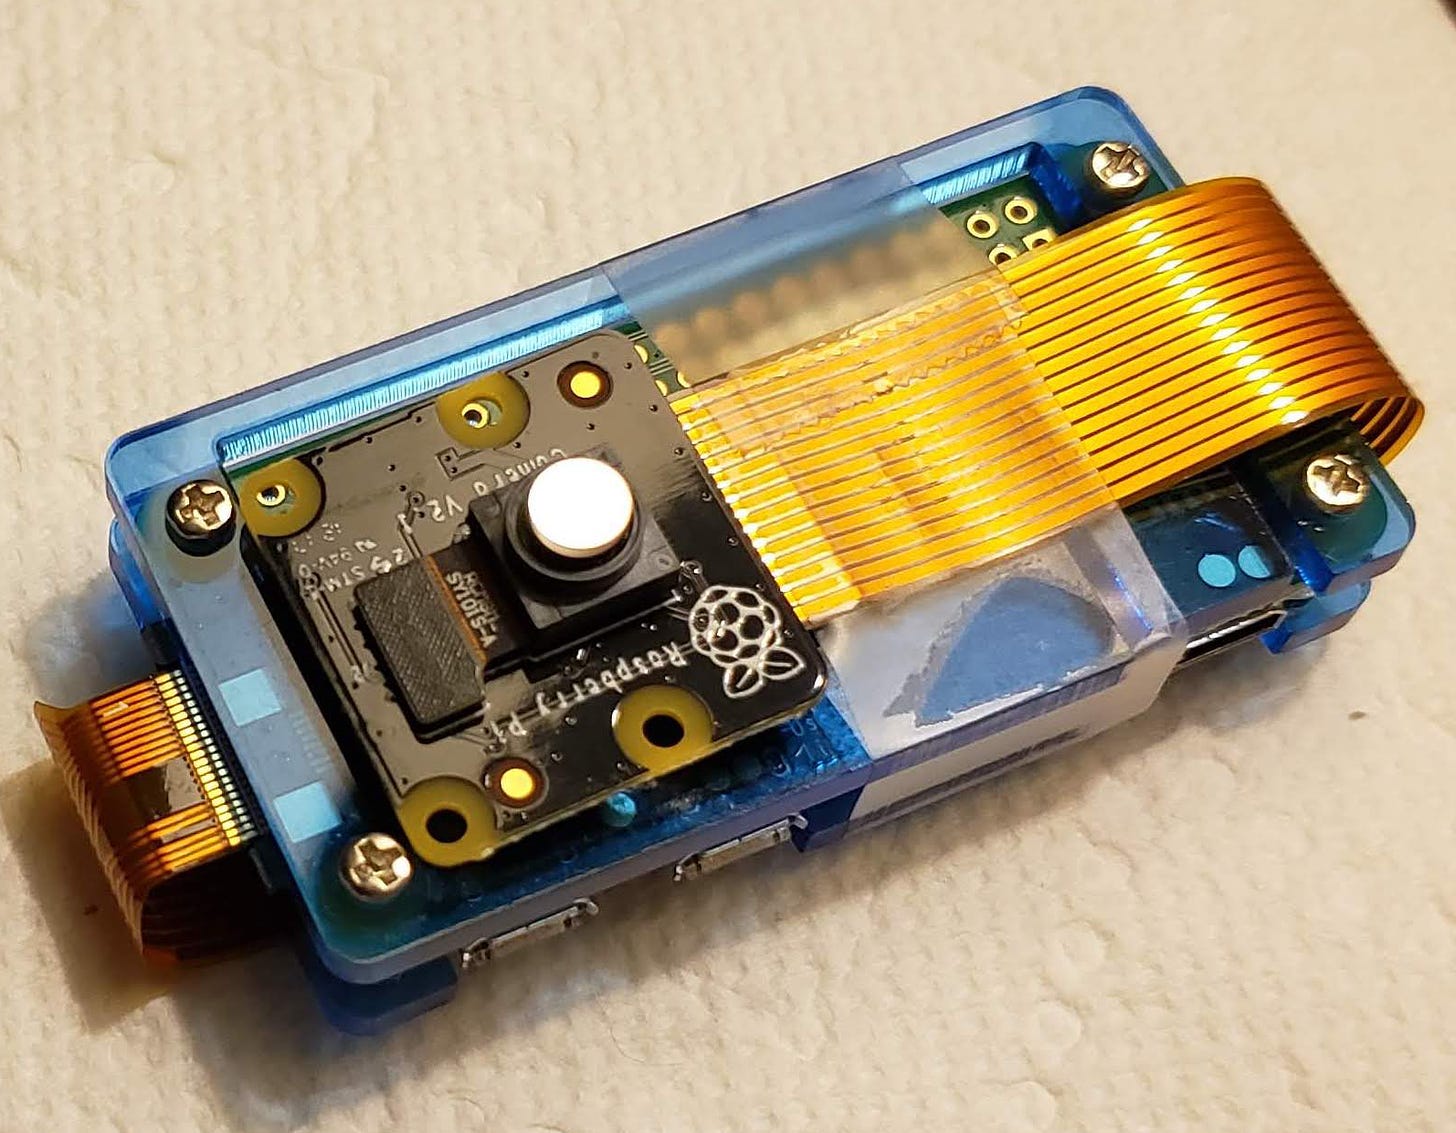 A small computer module, about the size of a thumb. It has a small camera attached. The lens of the camera is covered with what looks like s small round mirror.